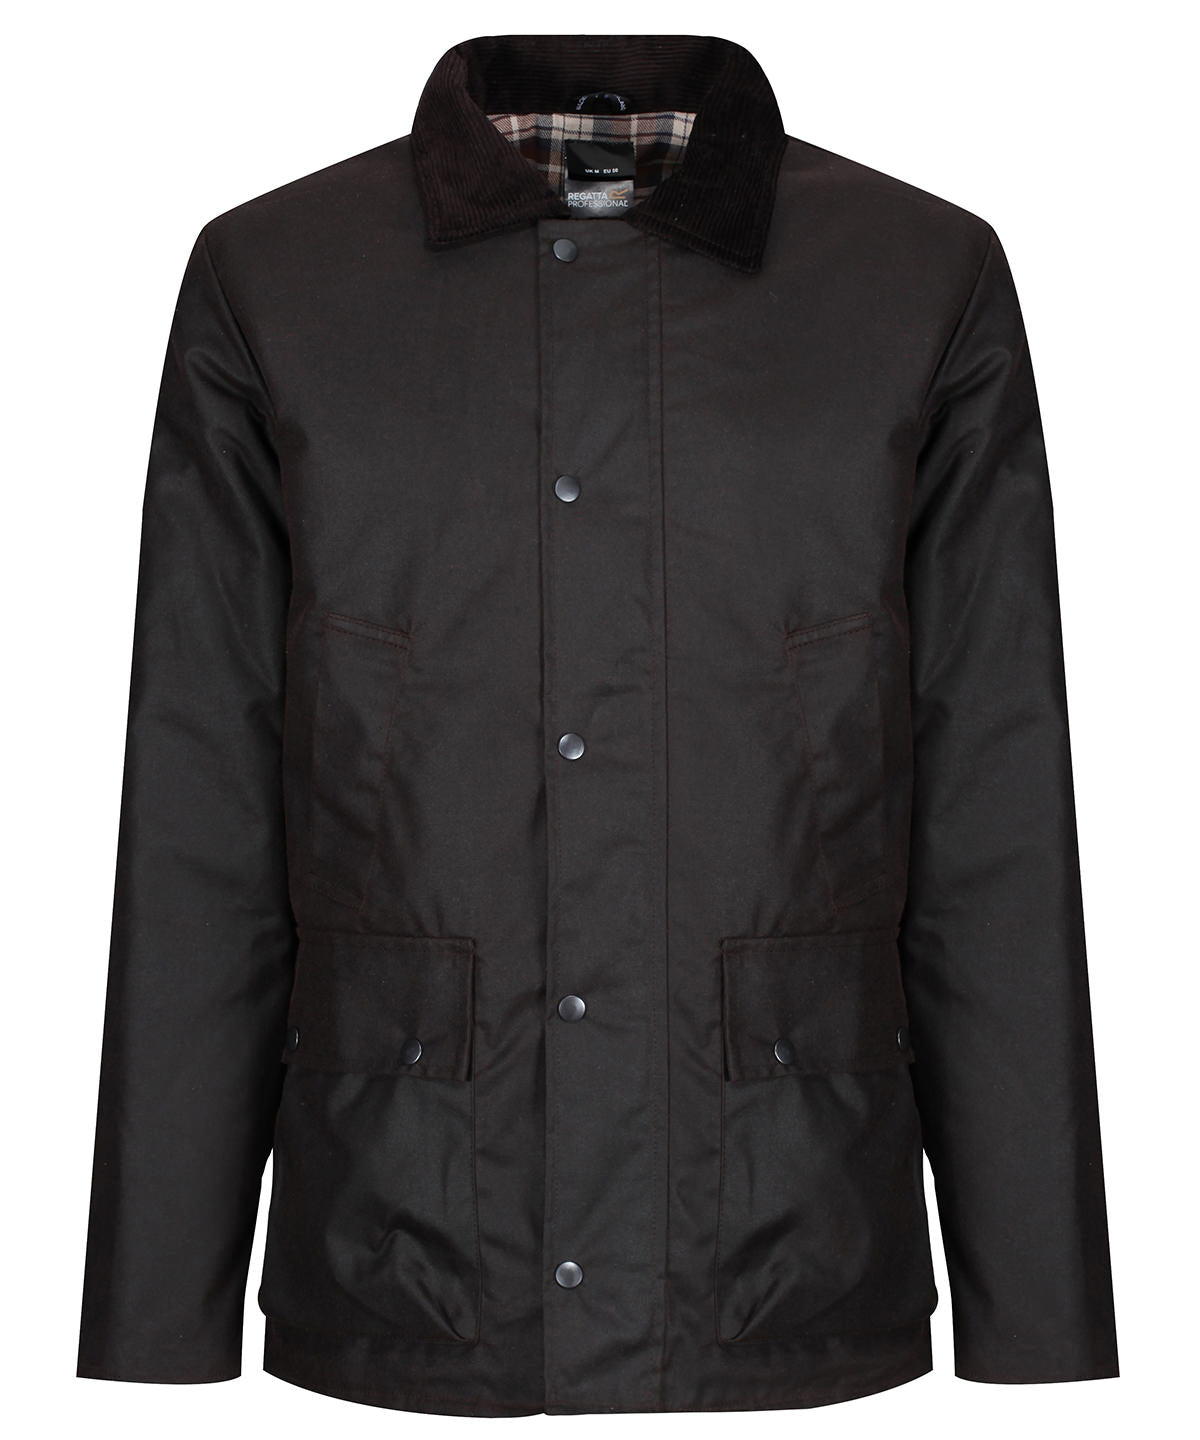 Pensford insulated waxed jacket